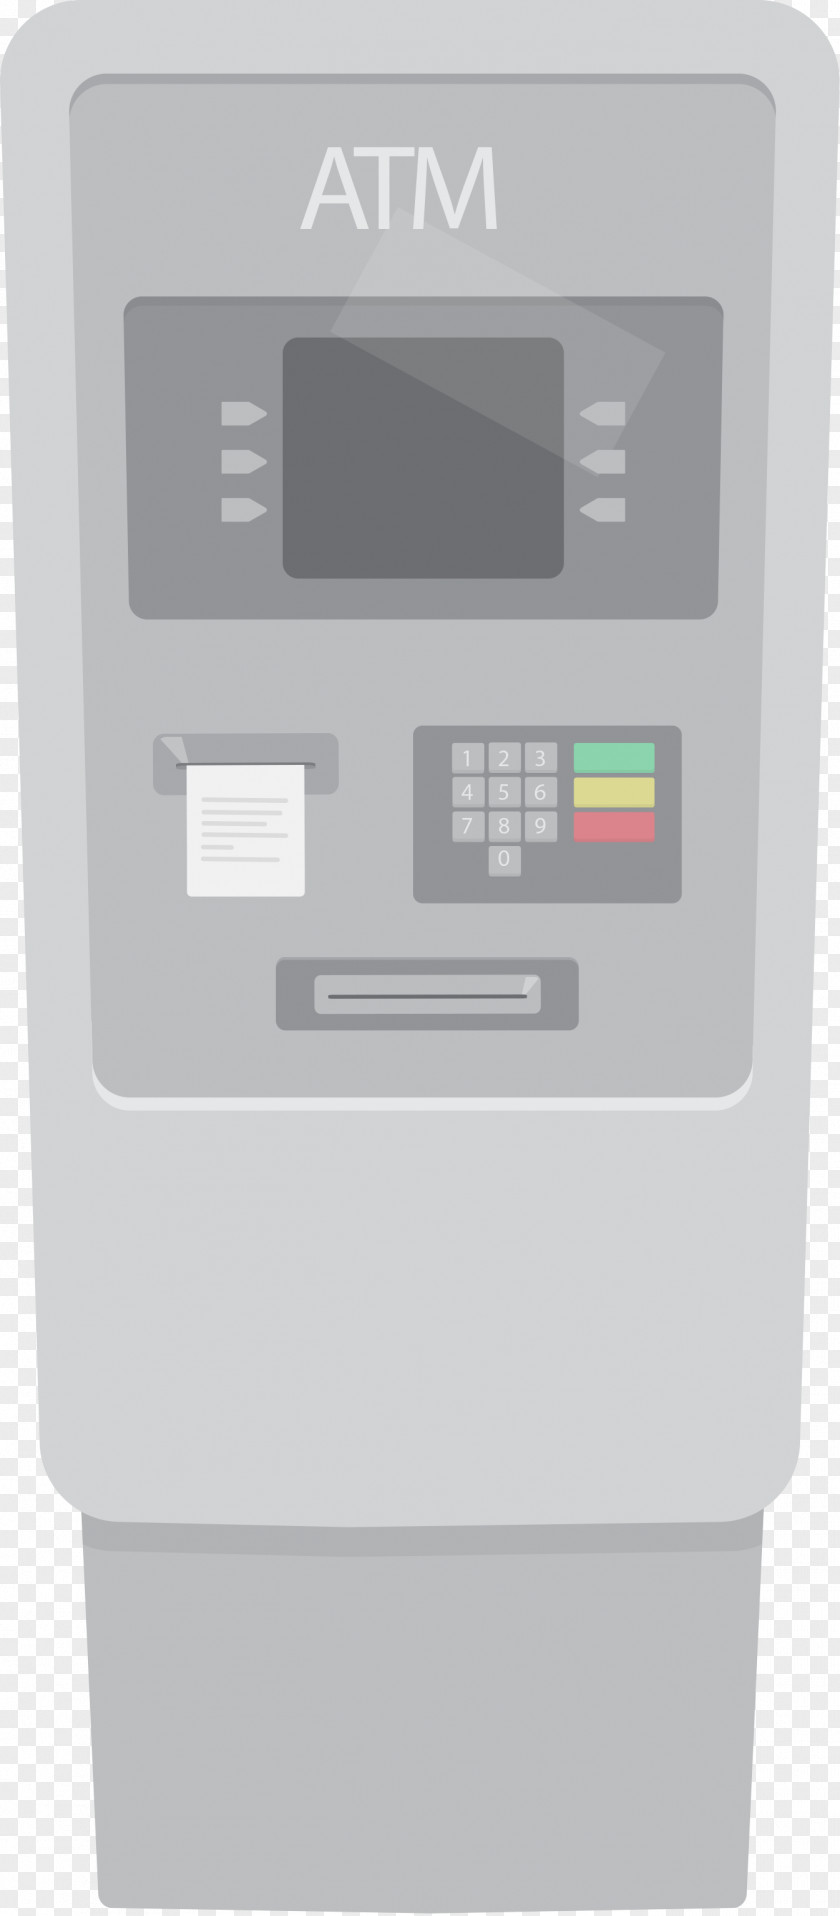 ATM Automated Teller Machine Icon PNG